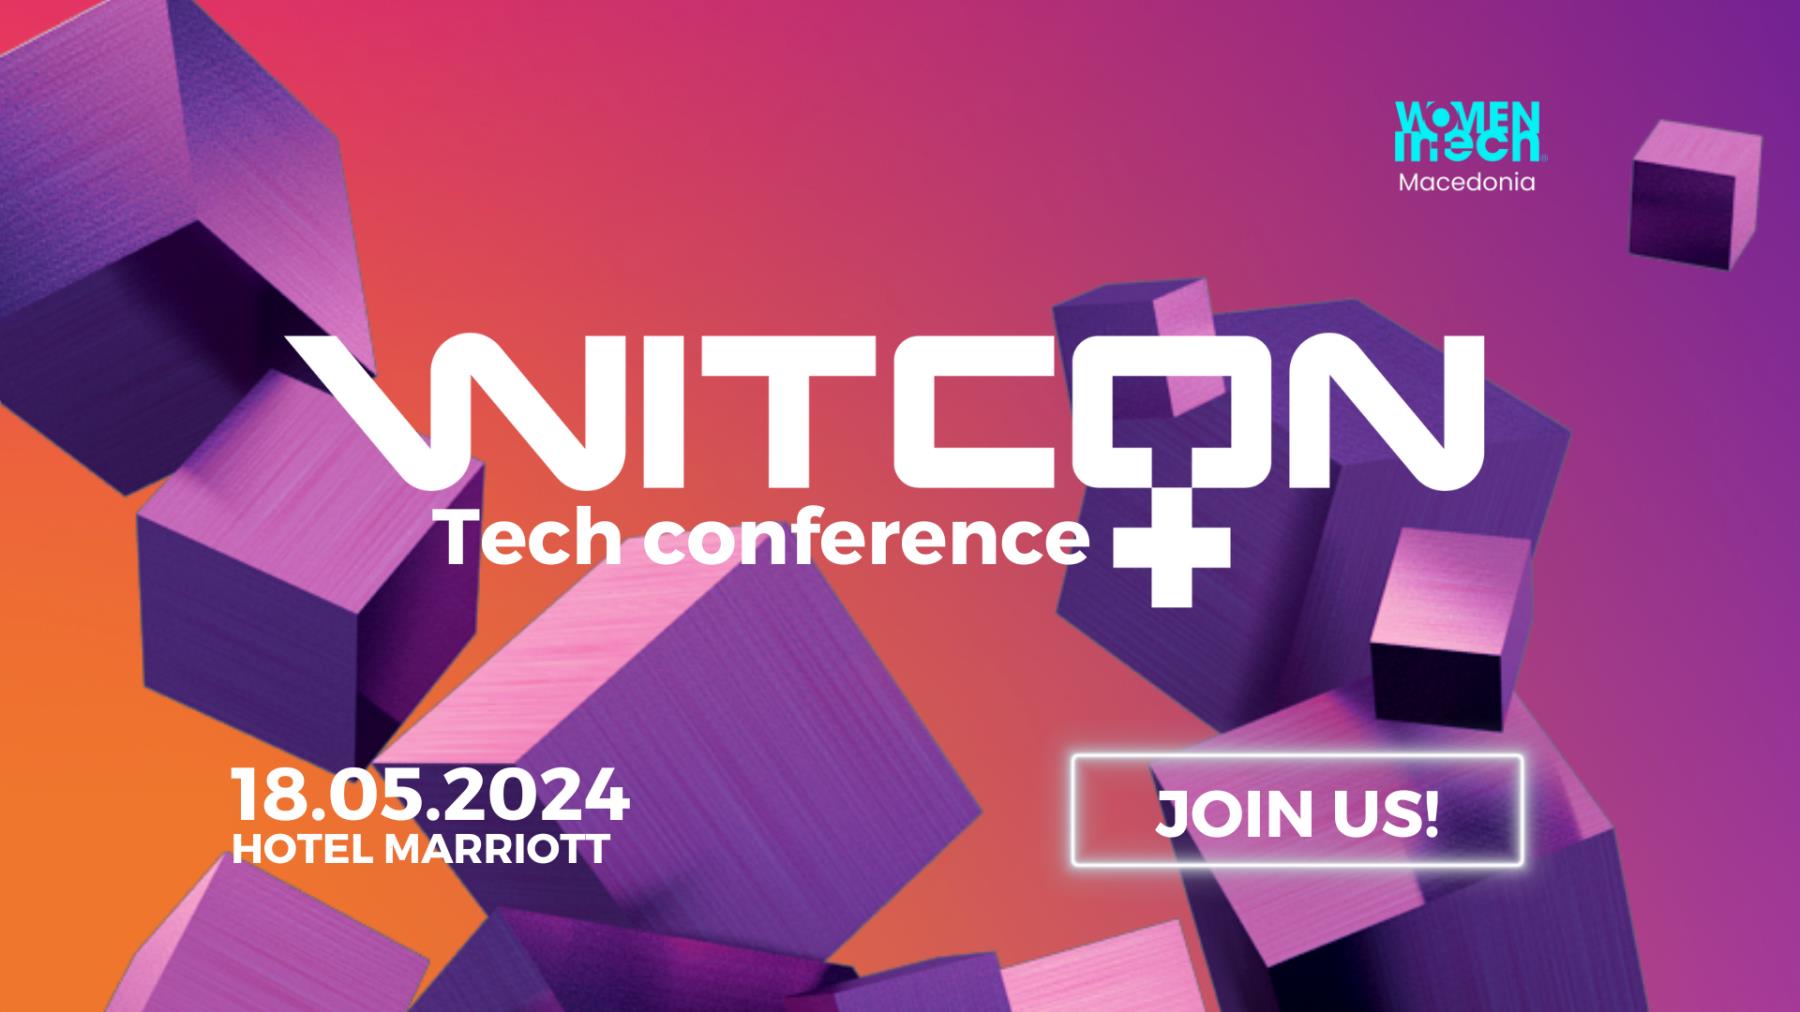 WITCON Tech Conference